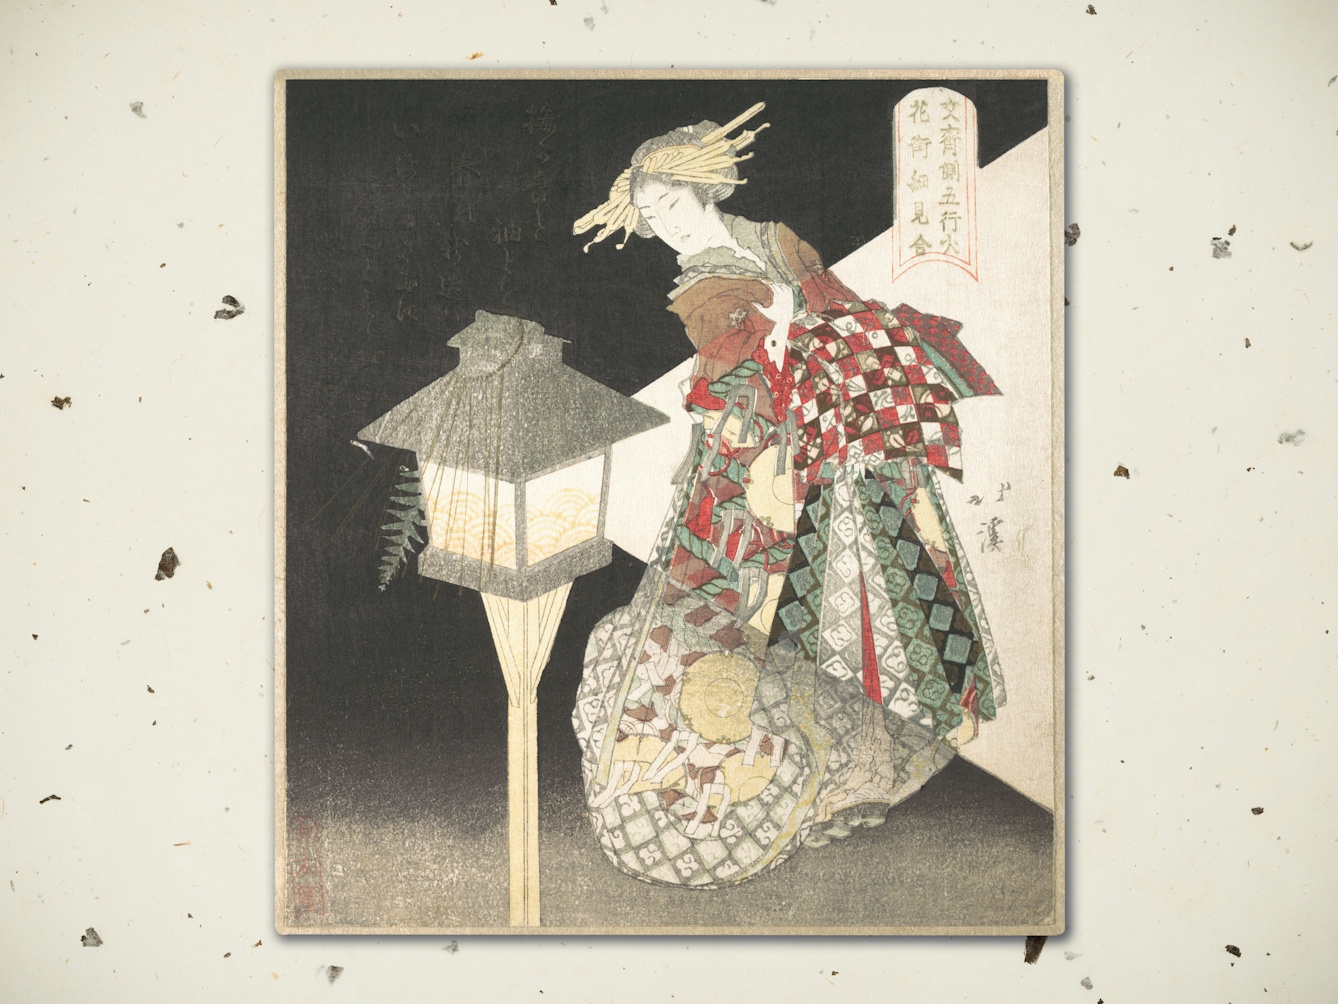 Digital composite image showing a textured rice paper background. Resting on top of the background is a 19th century illustration showing a Japanese courtesan wearing elaborate clothing, next to a street lantern. She is pictured in full length.